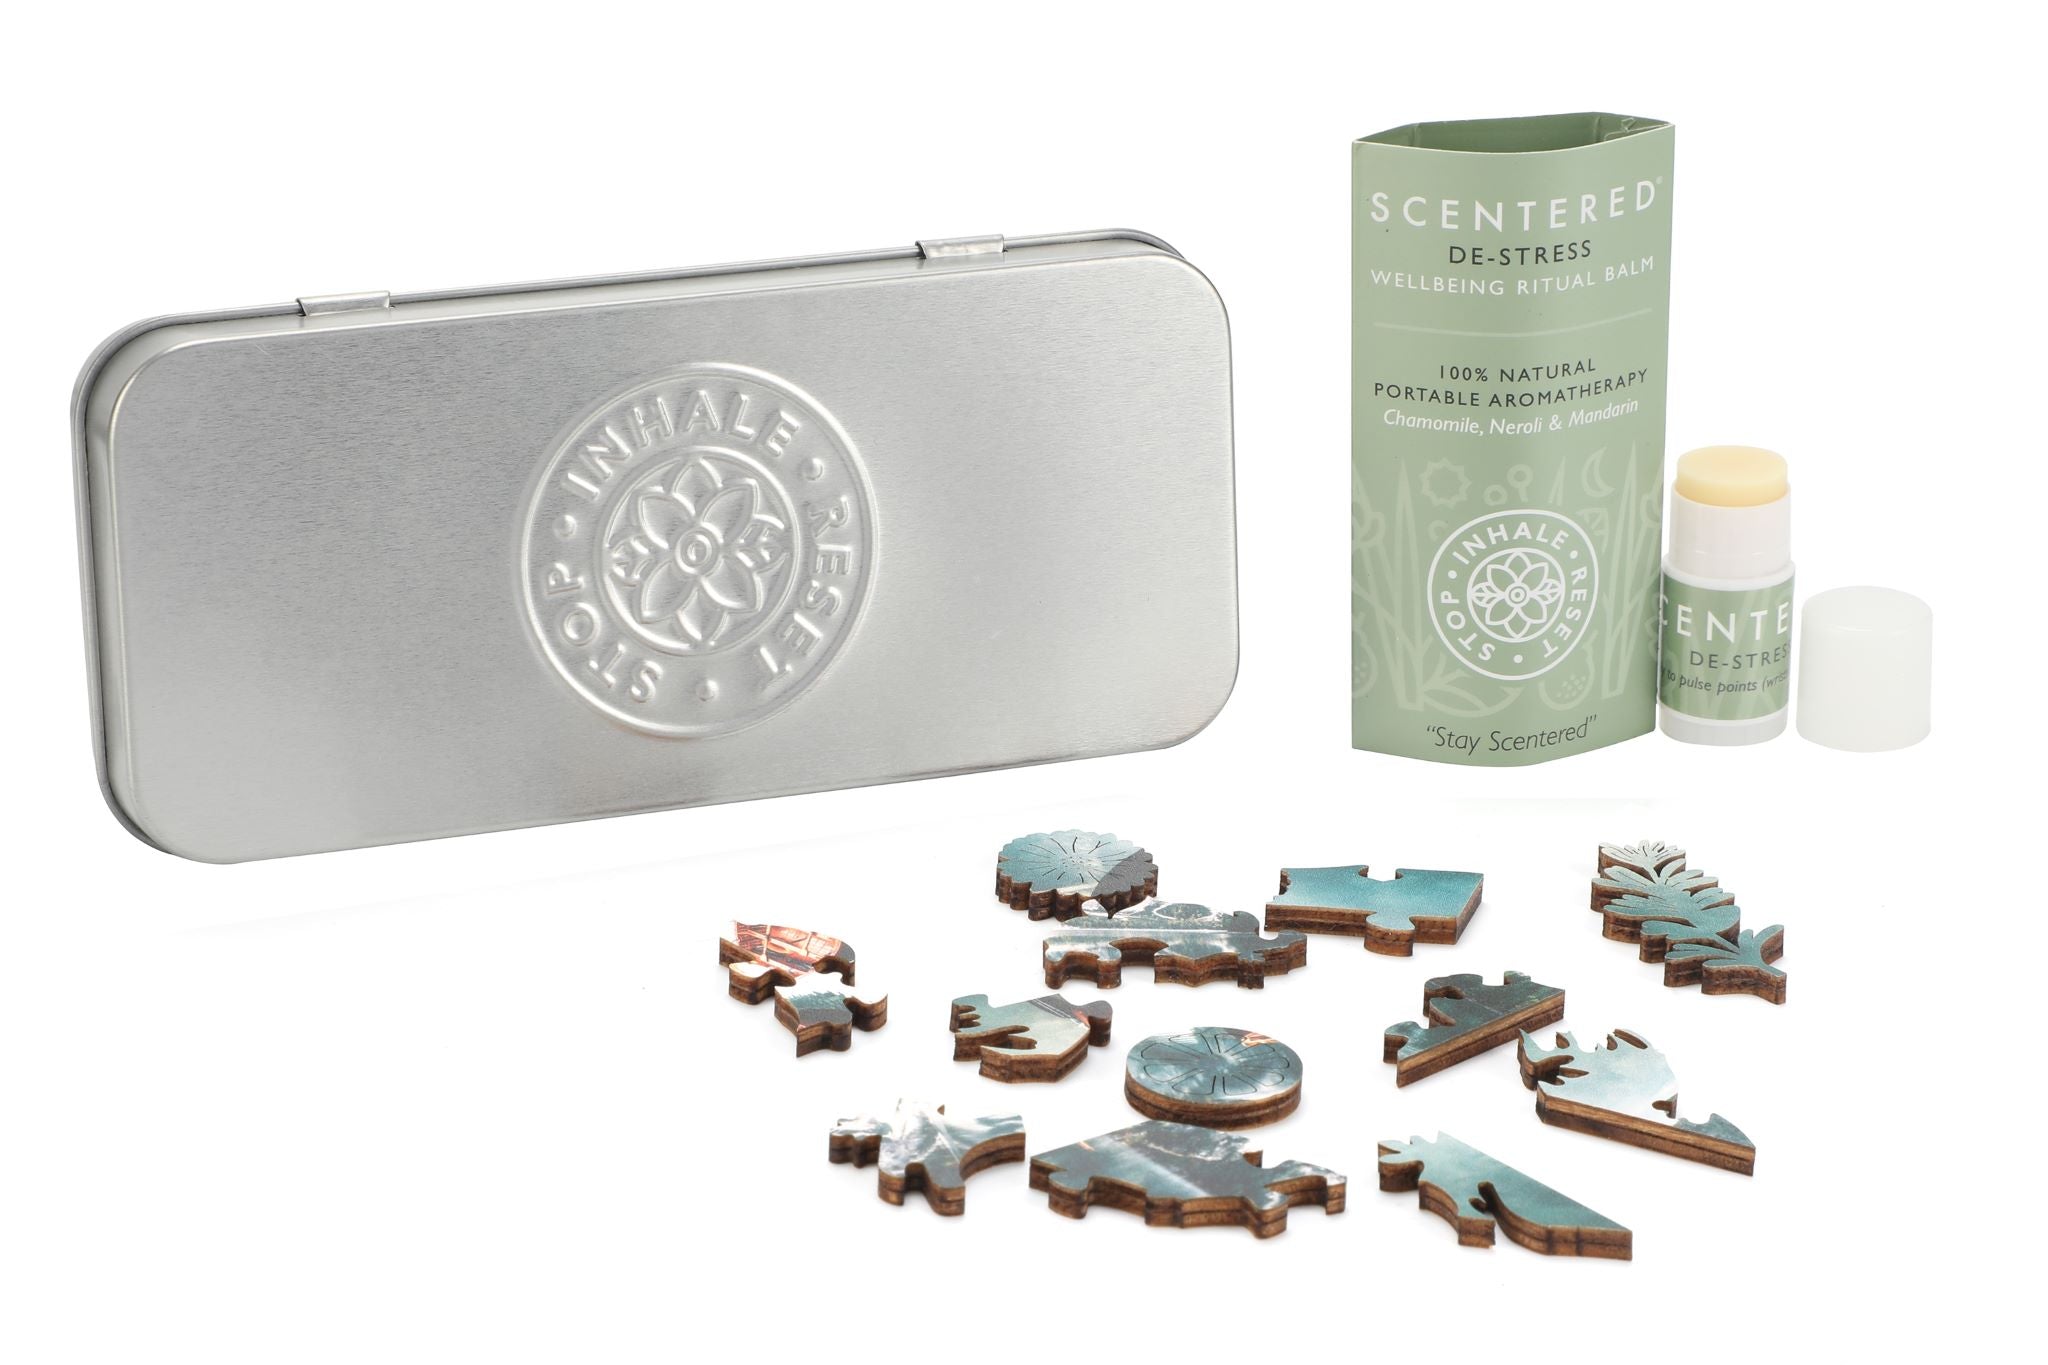 parts of puzzle laid in front of silver tin and Scentered De-stress Mini balm with cap off next to balm sleeve 